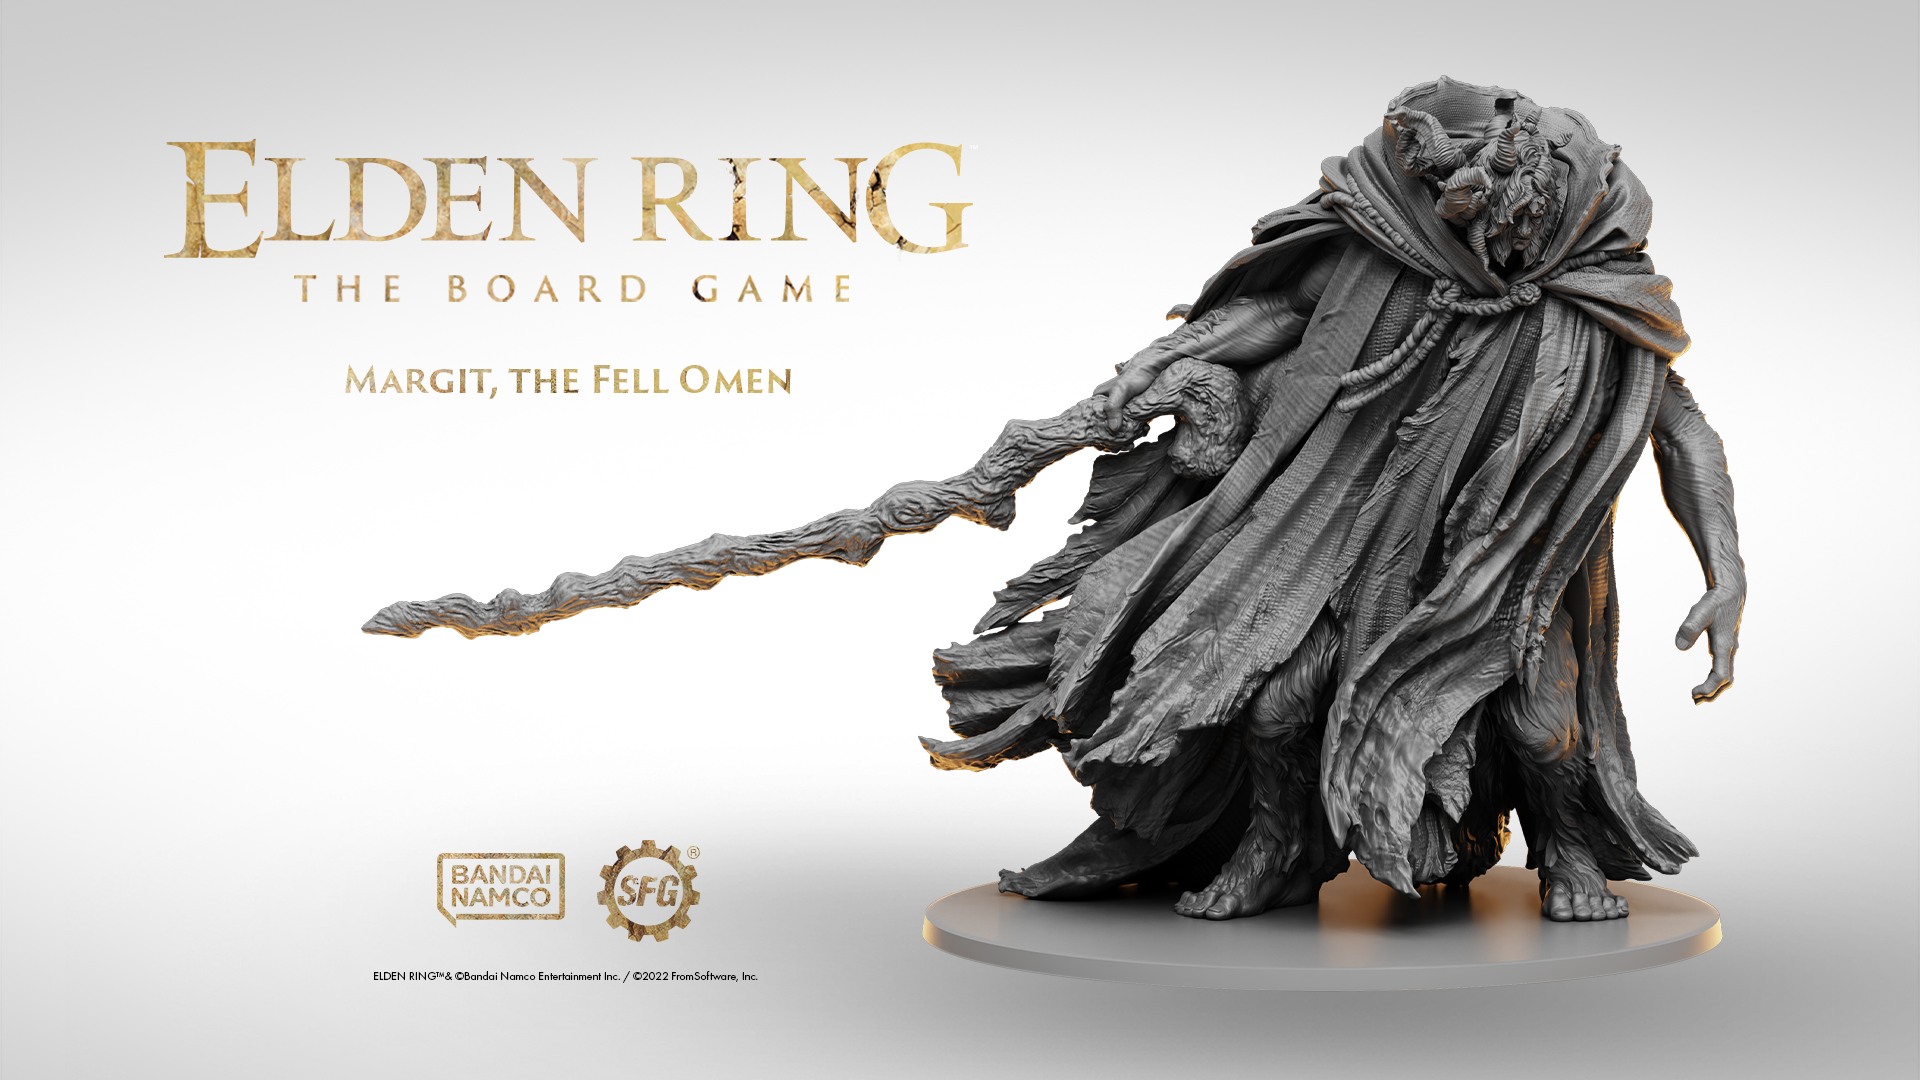 Elden Ring' Is The New Game From The Creators Of 'Dark Souls' And